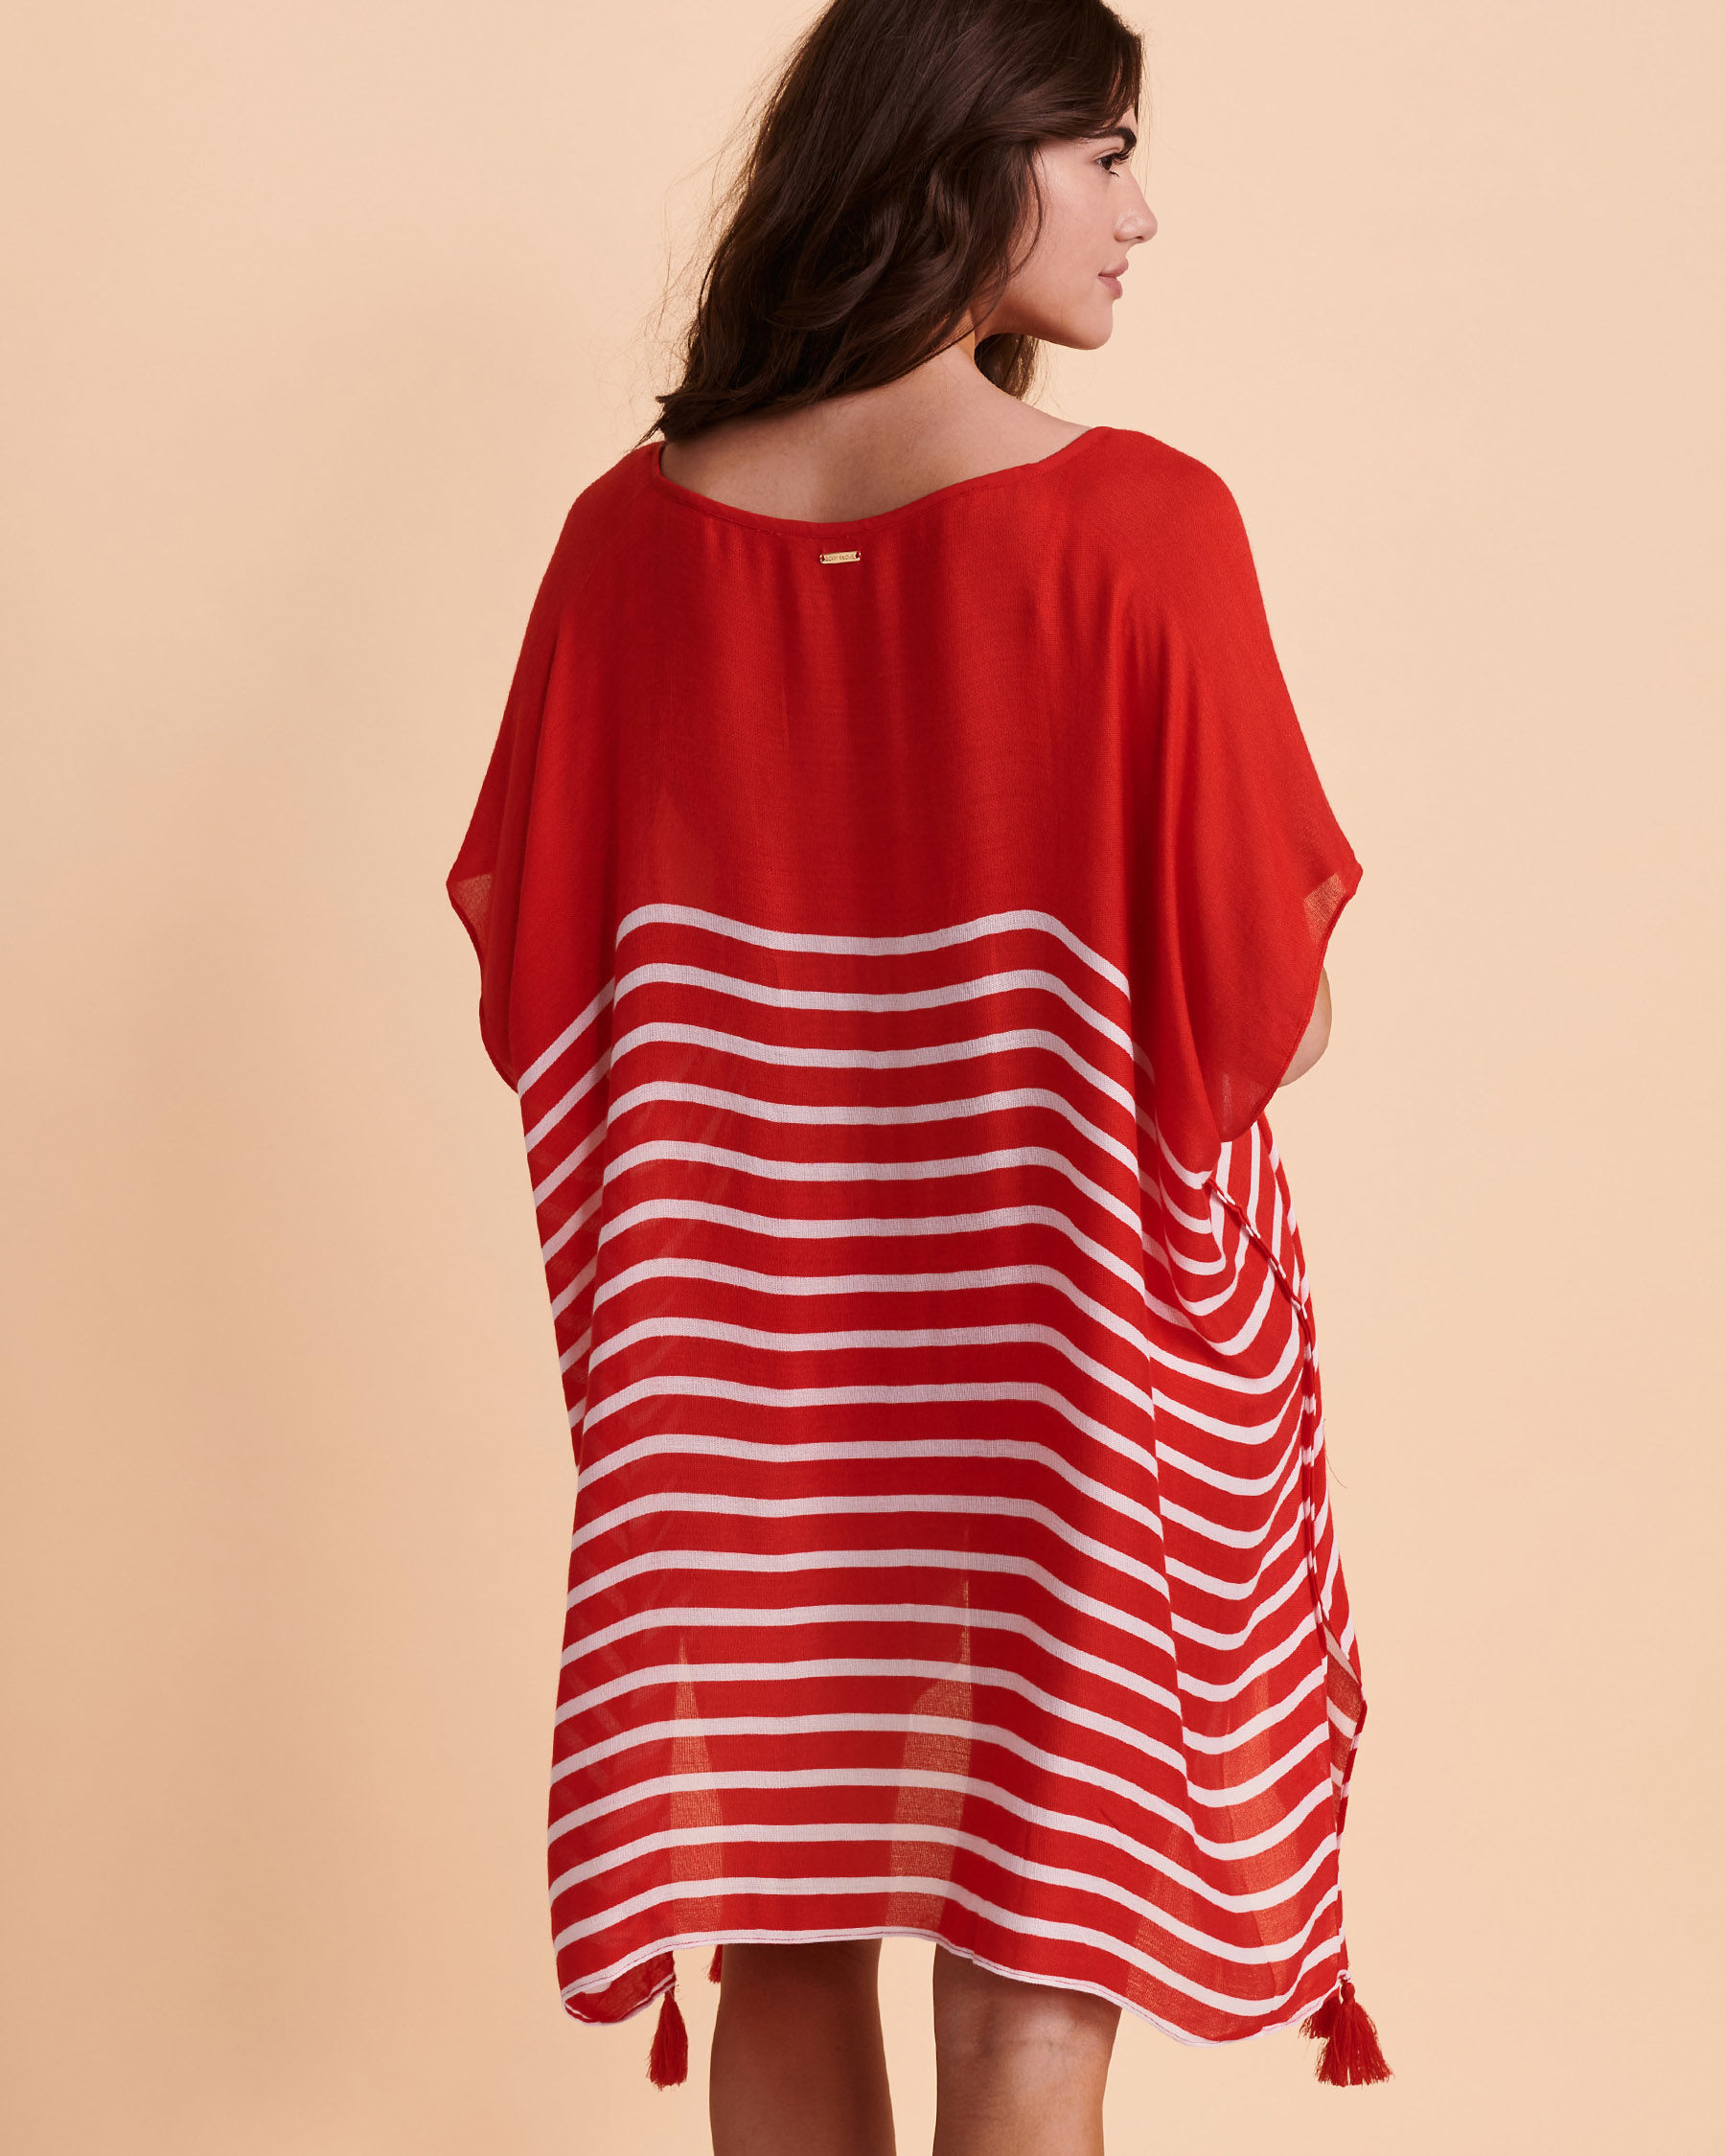 BODY GLOVE AJANA Nautical Loose Dress Red and stripes 39456622 - View2